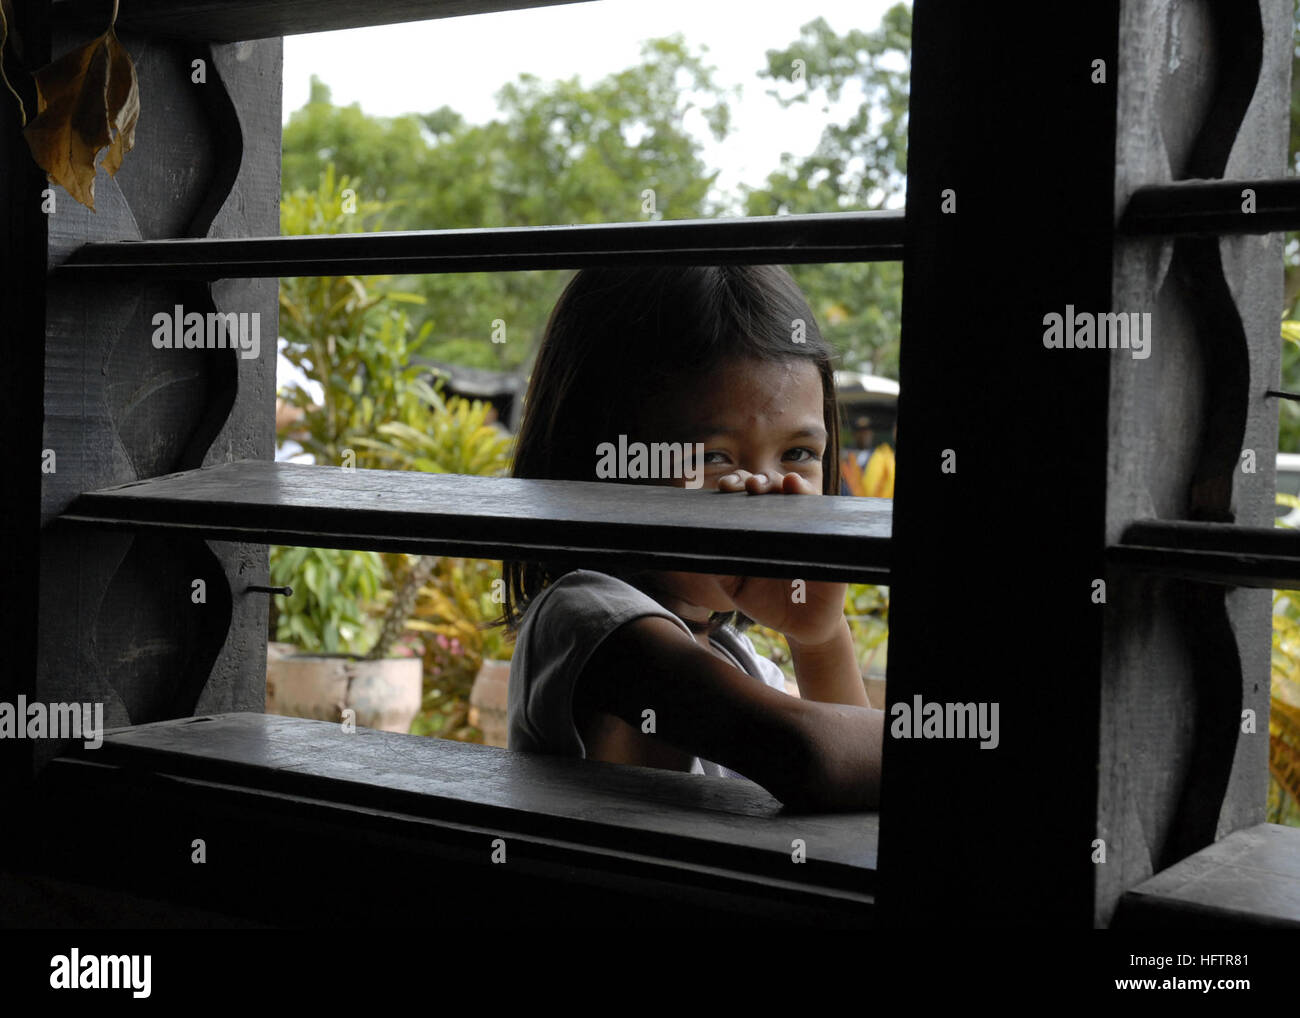 070616-N-4267W-024 COTABATO, Philippines (June 16, 2007) - A Filipino child looks through the window of a school that will be remodeled with the cooperation from members of the Filipino 54th Engineering Brigade, Naval Mobile Construction Battalion (NMCB) 7, and Amphibious Construction Battalion (ACB) 1. NMCB-7 and ACB-1 are deployed with amphibious assault ship USS Peleliu (LHA 5) in support of Pacific Partnership 2007, a four-month humanitarian assistance mission to Southeast Asia and Oceania that includes specialized medical care and various construction and engineering projects. U.S. Navy p Stock Photo